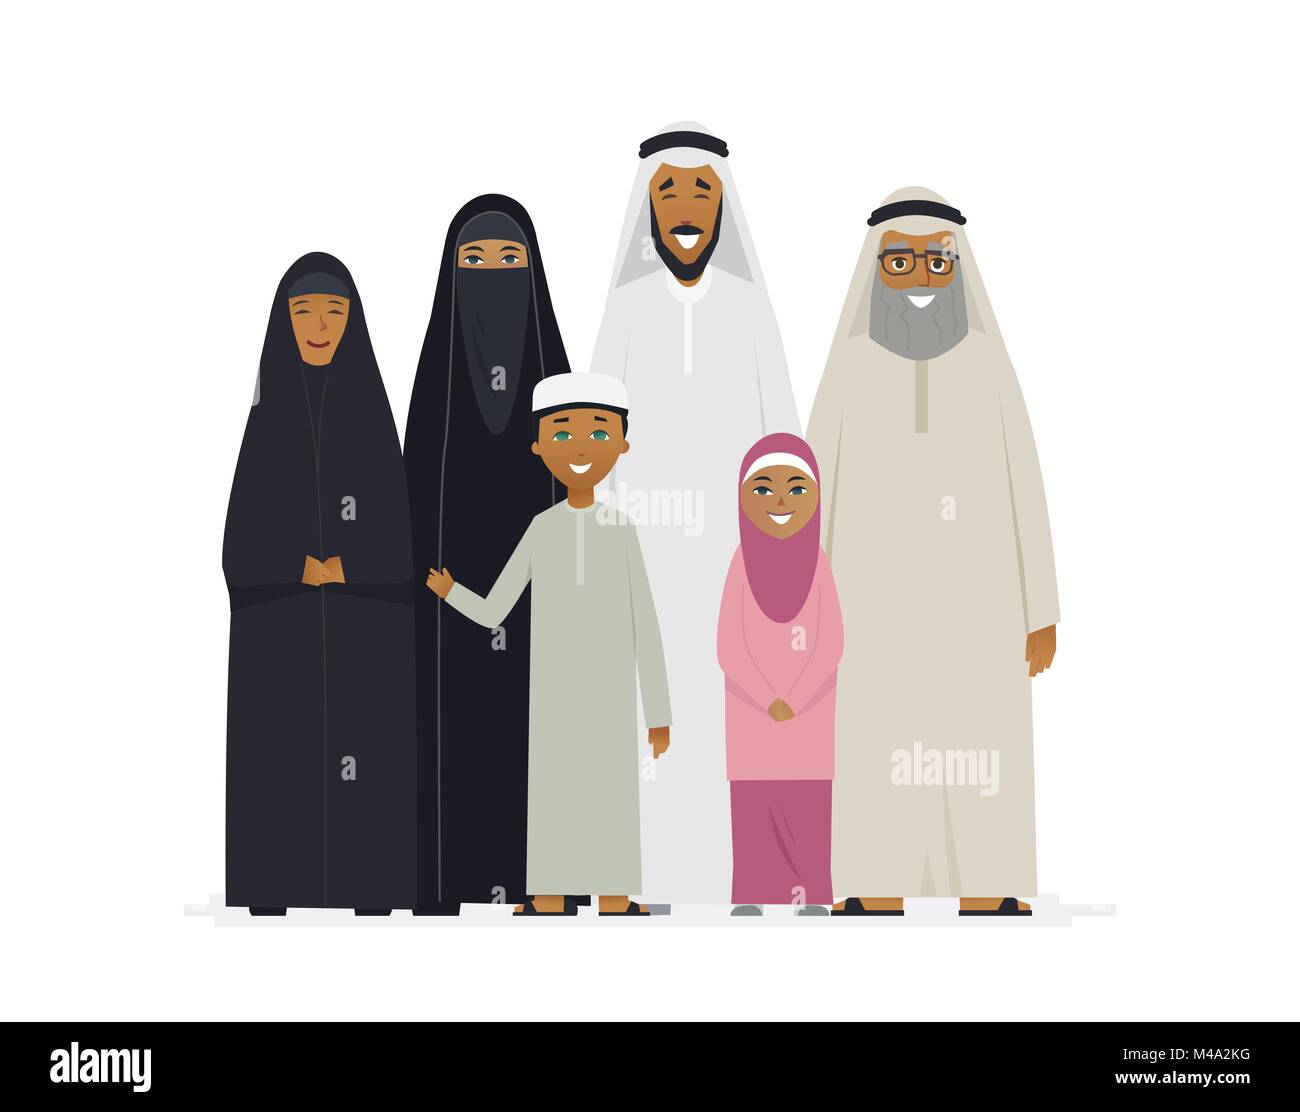 Big Muslim family - cartoon people characters isolated illustration Stock Vector